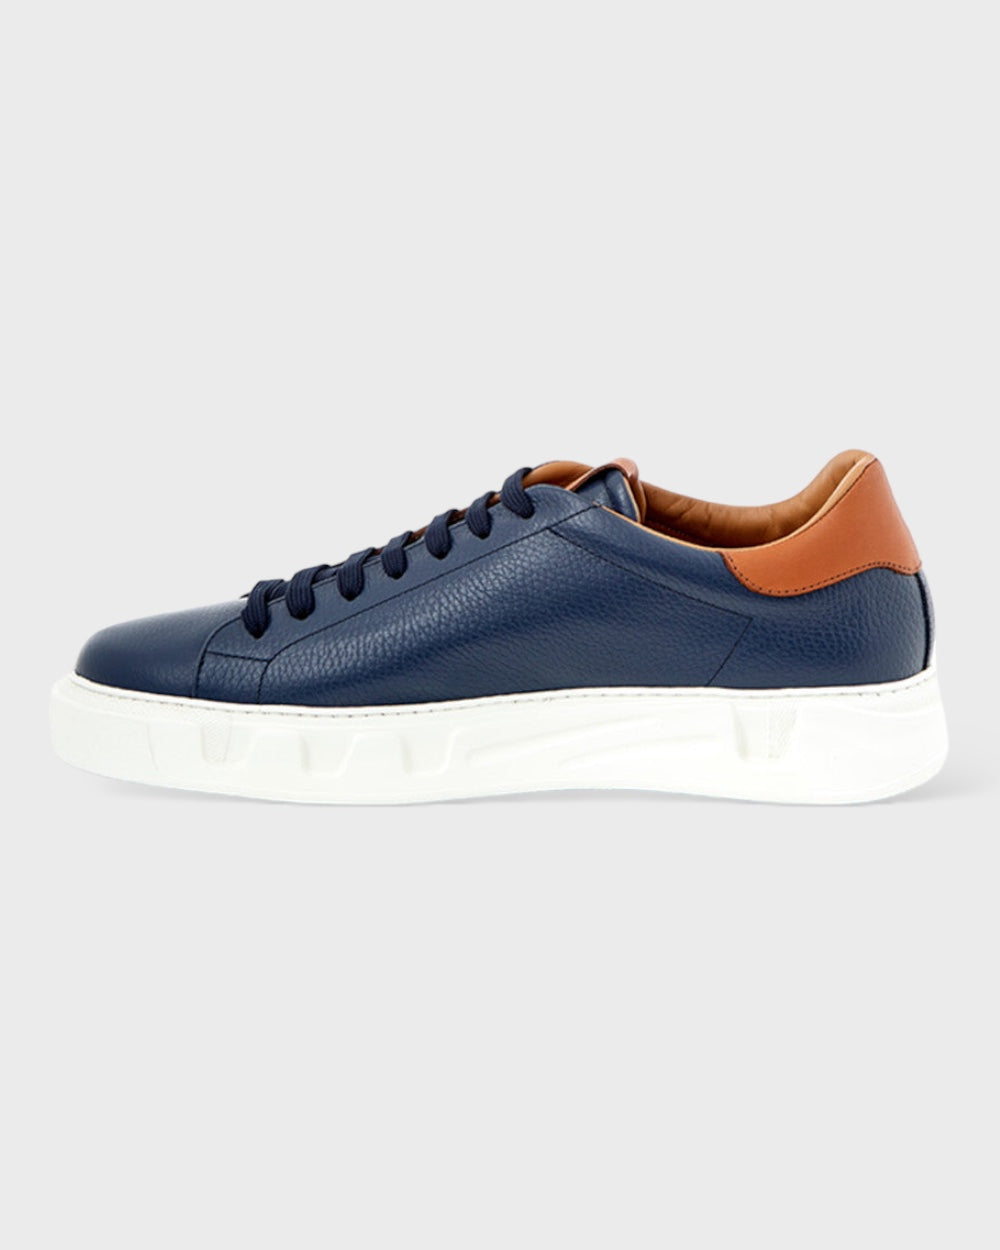 Roberto Cavalli Blue Leather Sneakers with Gold Logo